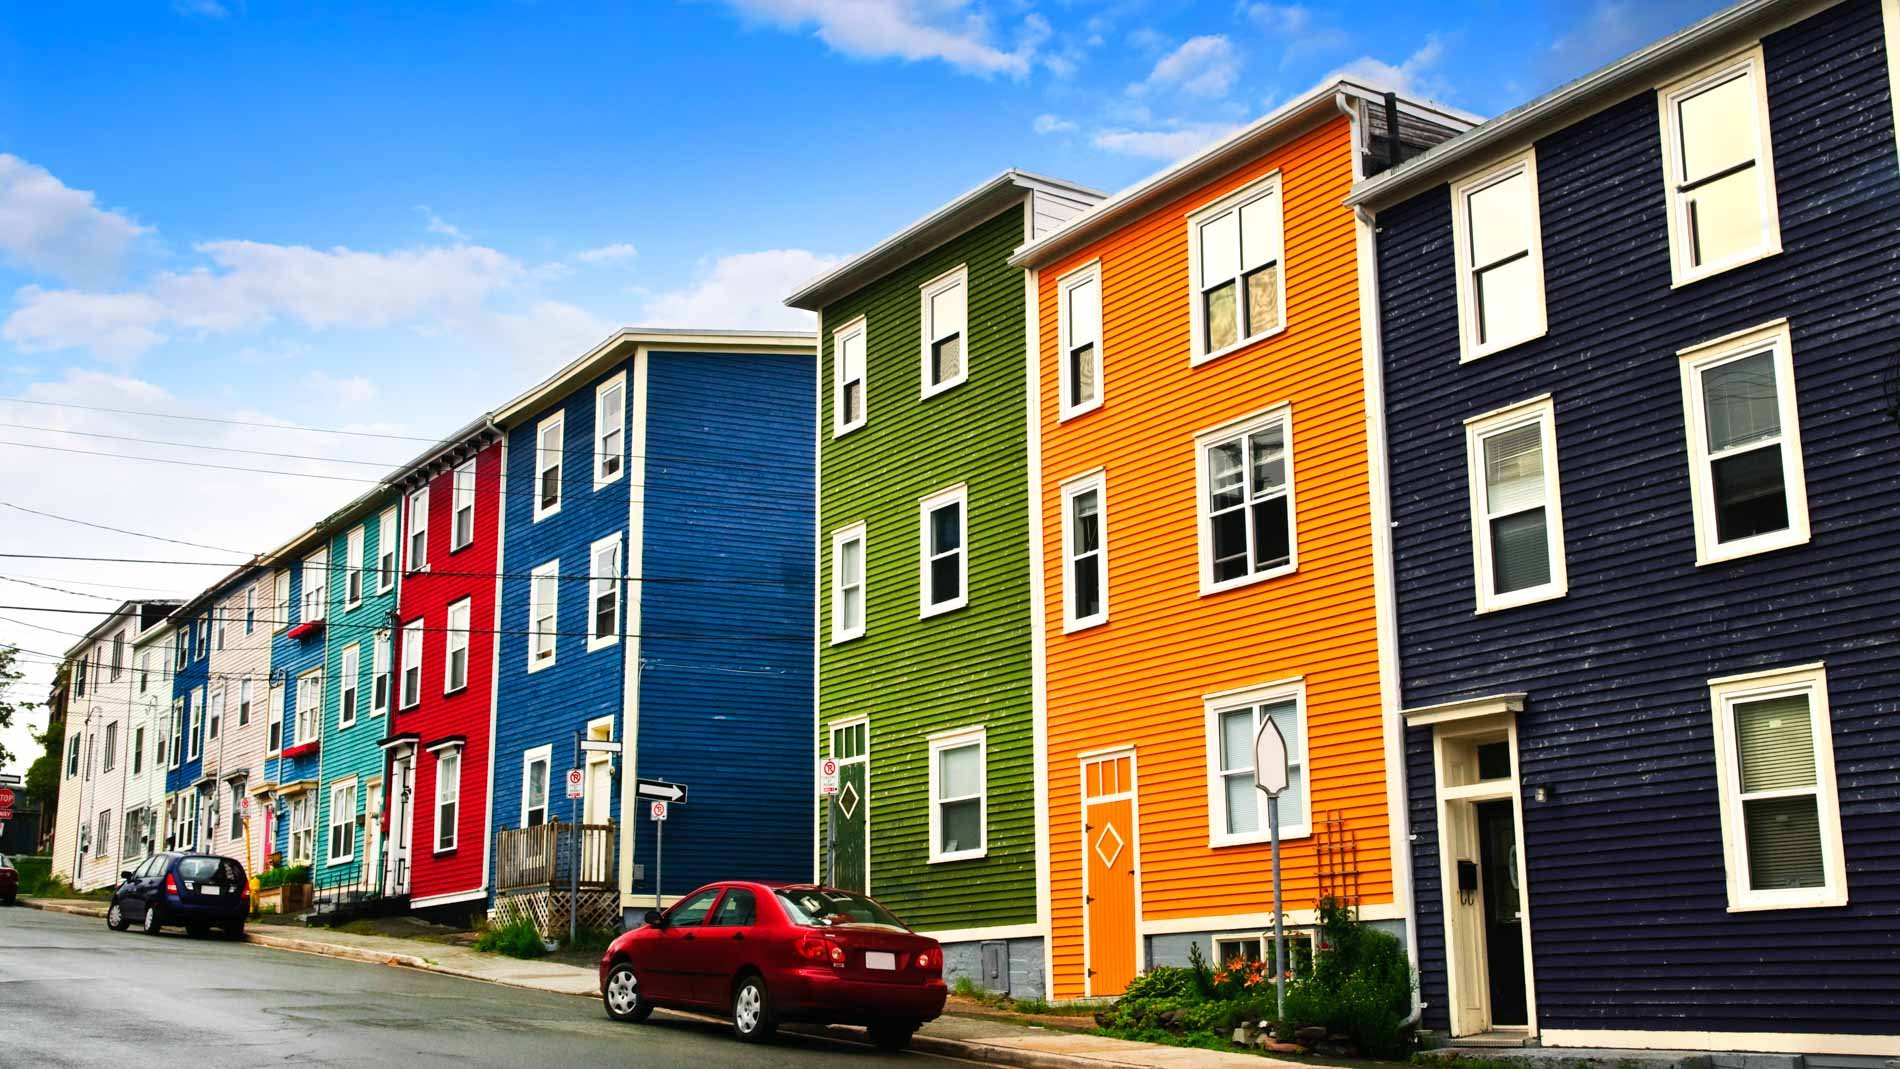 Street with colorful houses in St. John's, Newfoundland, Canada